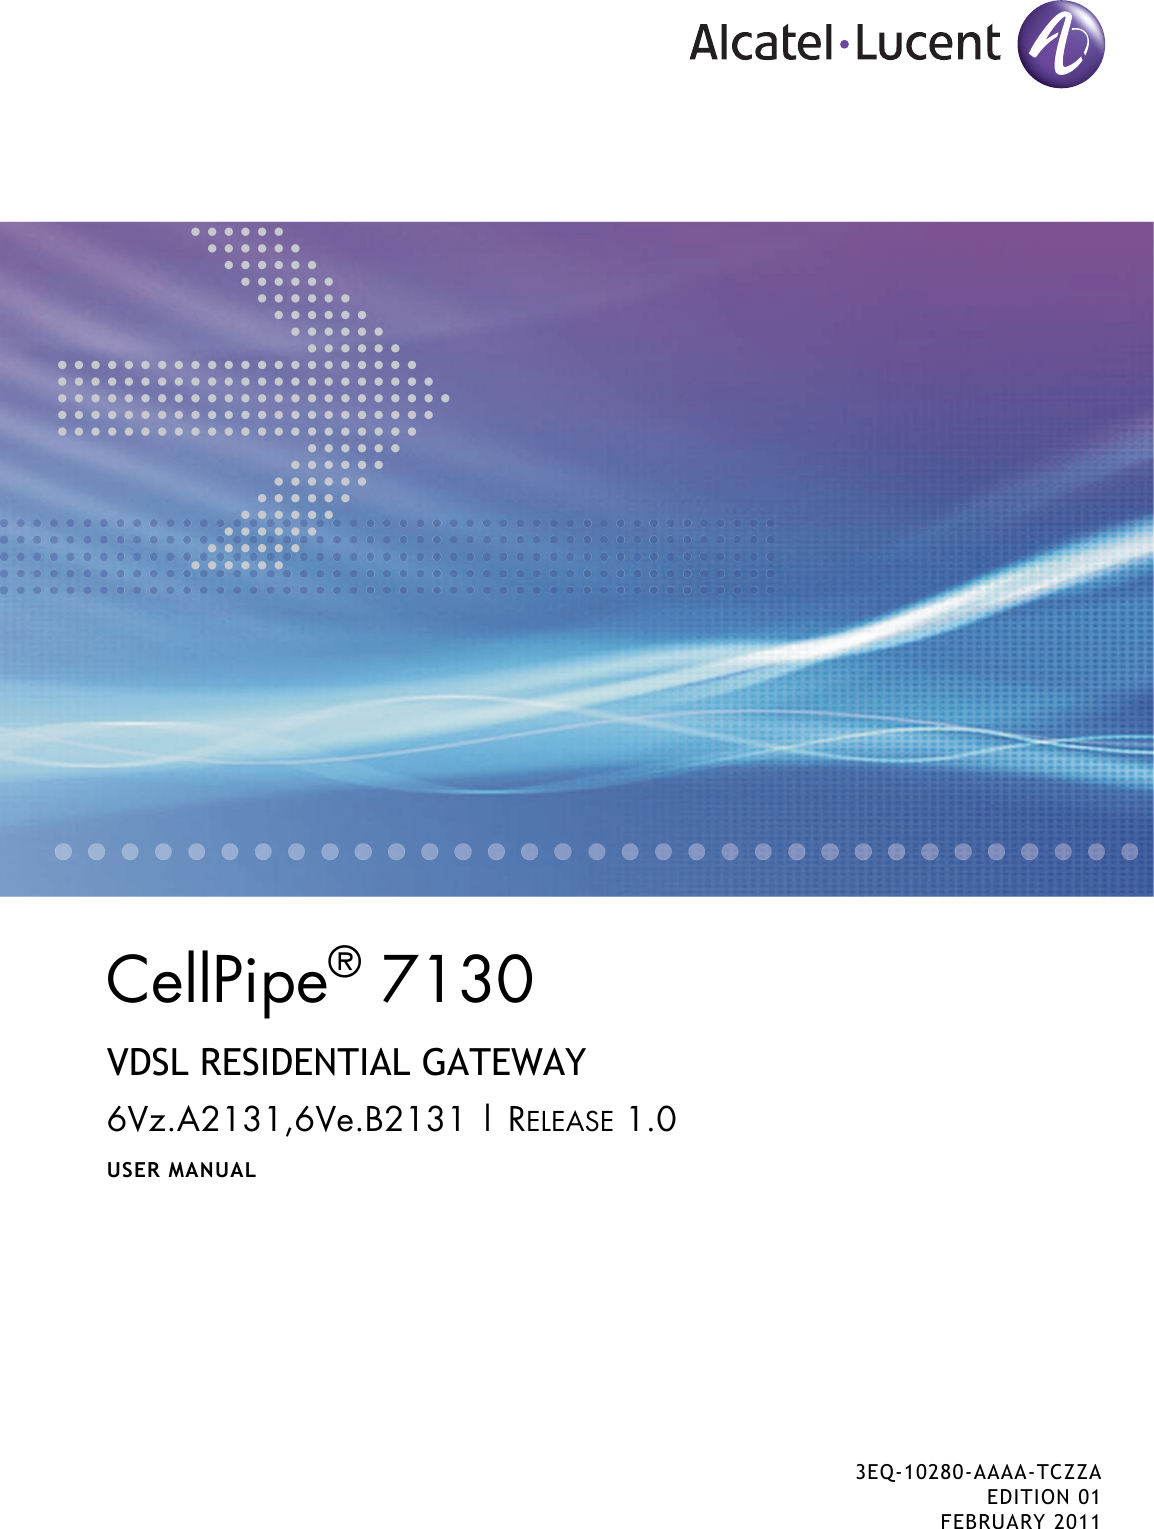 CellPipe® 7130VDSL RESIDENTIAL GATEWAY6Vz.A2131,6Ve.B2131 | RELEASE 1.0USER MANUAL3EQ-10280-AAAA-TCZZAEDITION 01FEBRUARY 2011